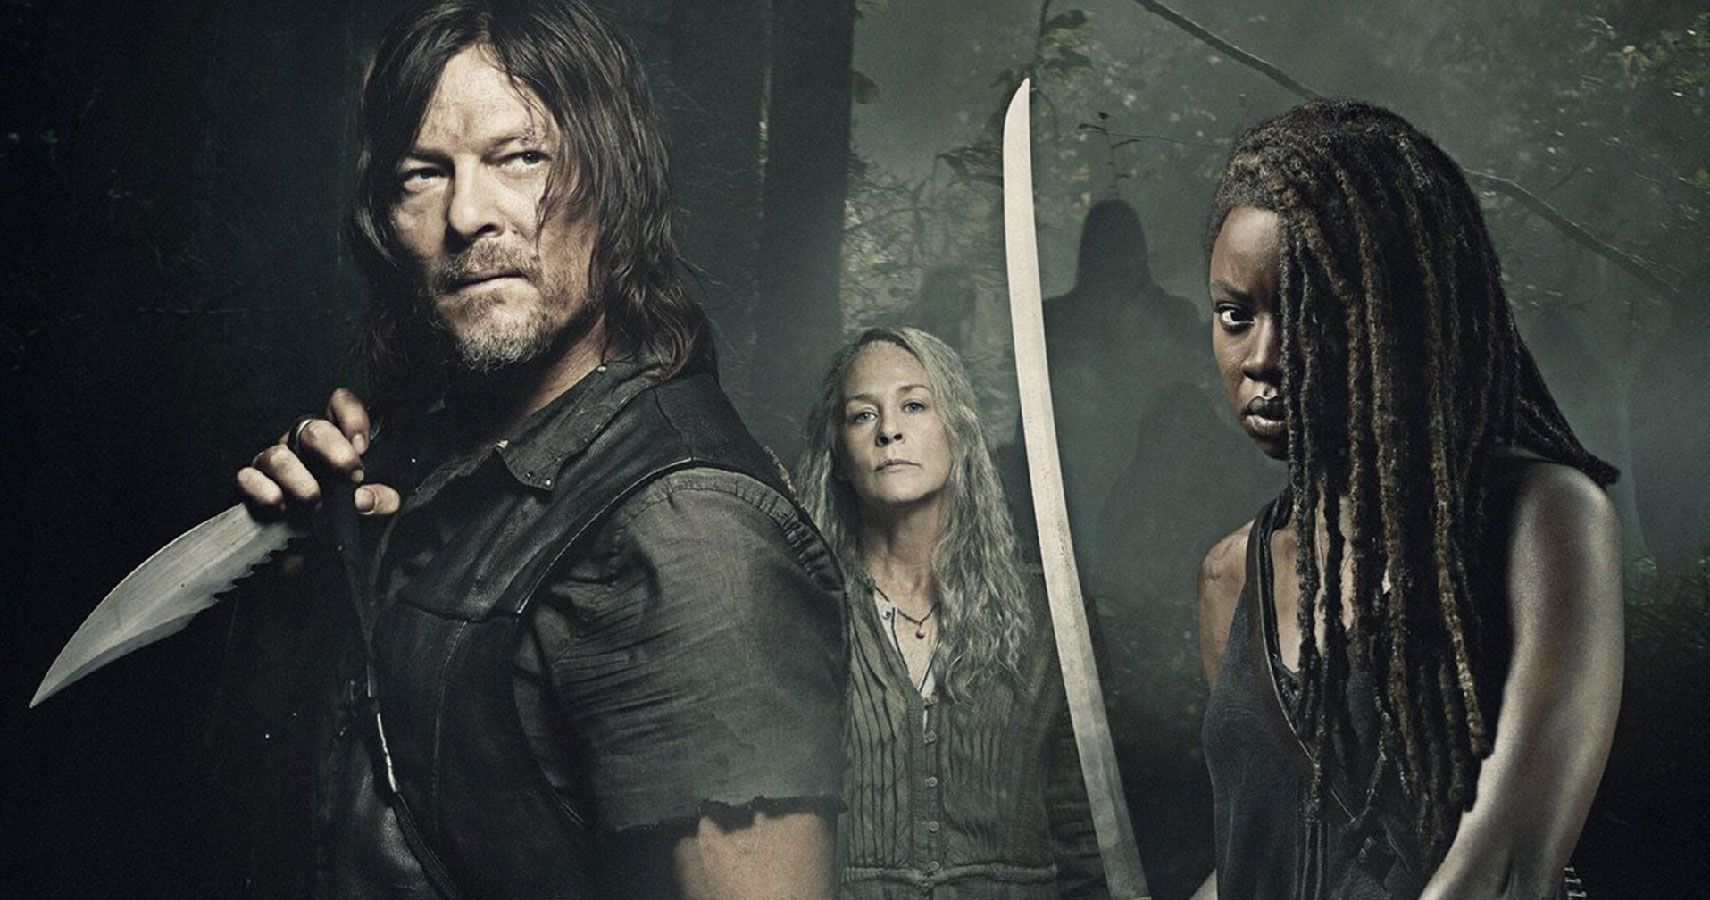 The Walking Dead 10 Characters We Need To See Survive The Final Season